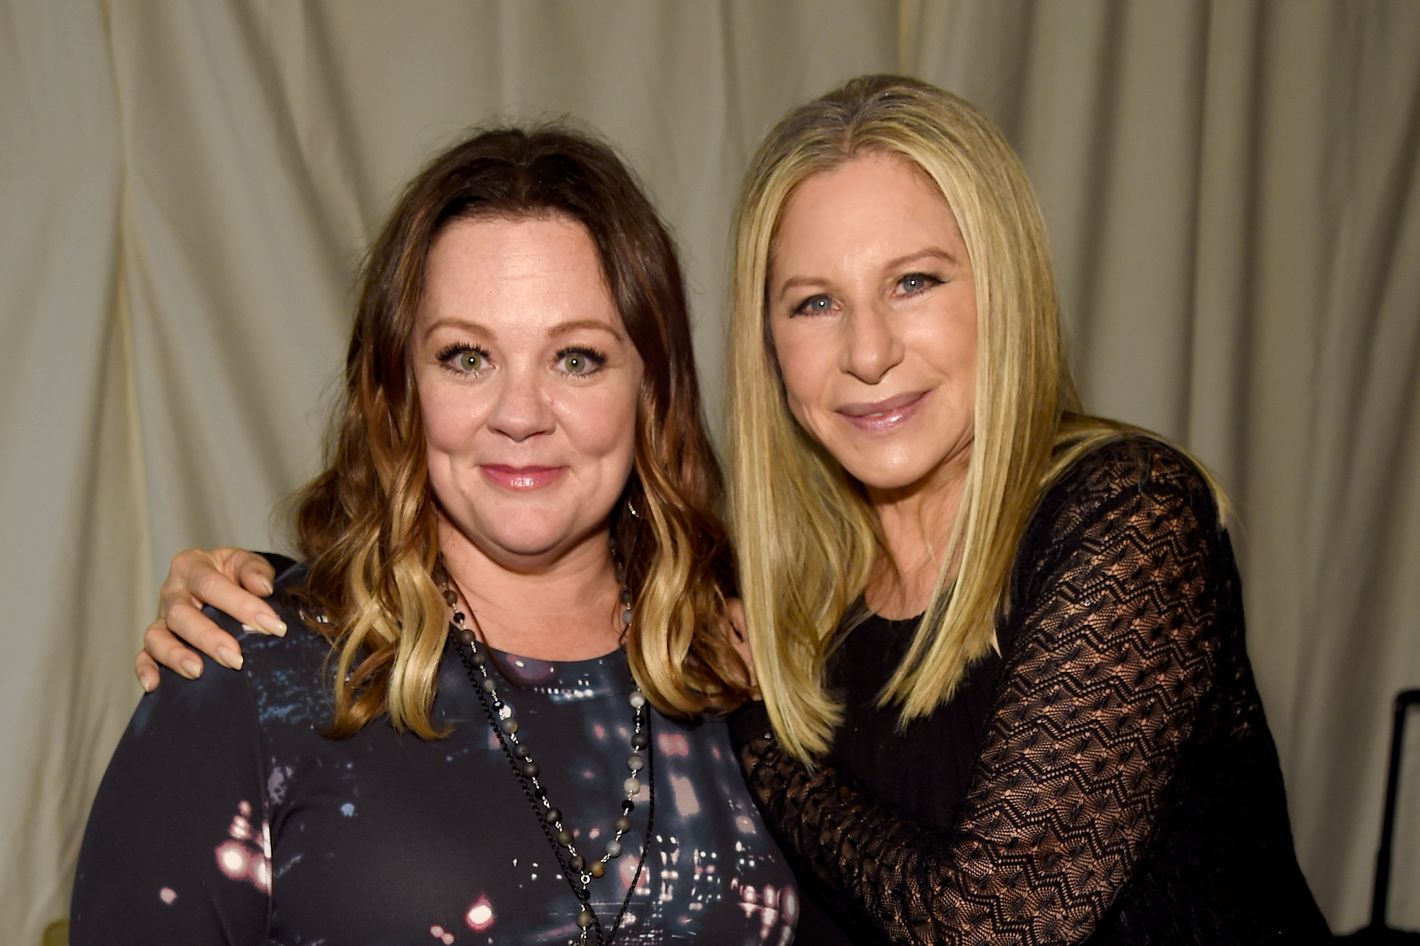 Barbra Streisand Asked Melissa McCarthy If She’s on Ozempic